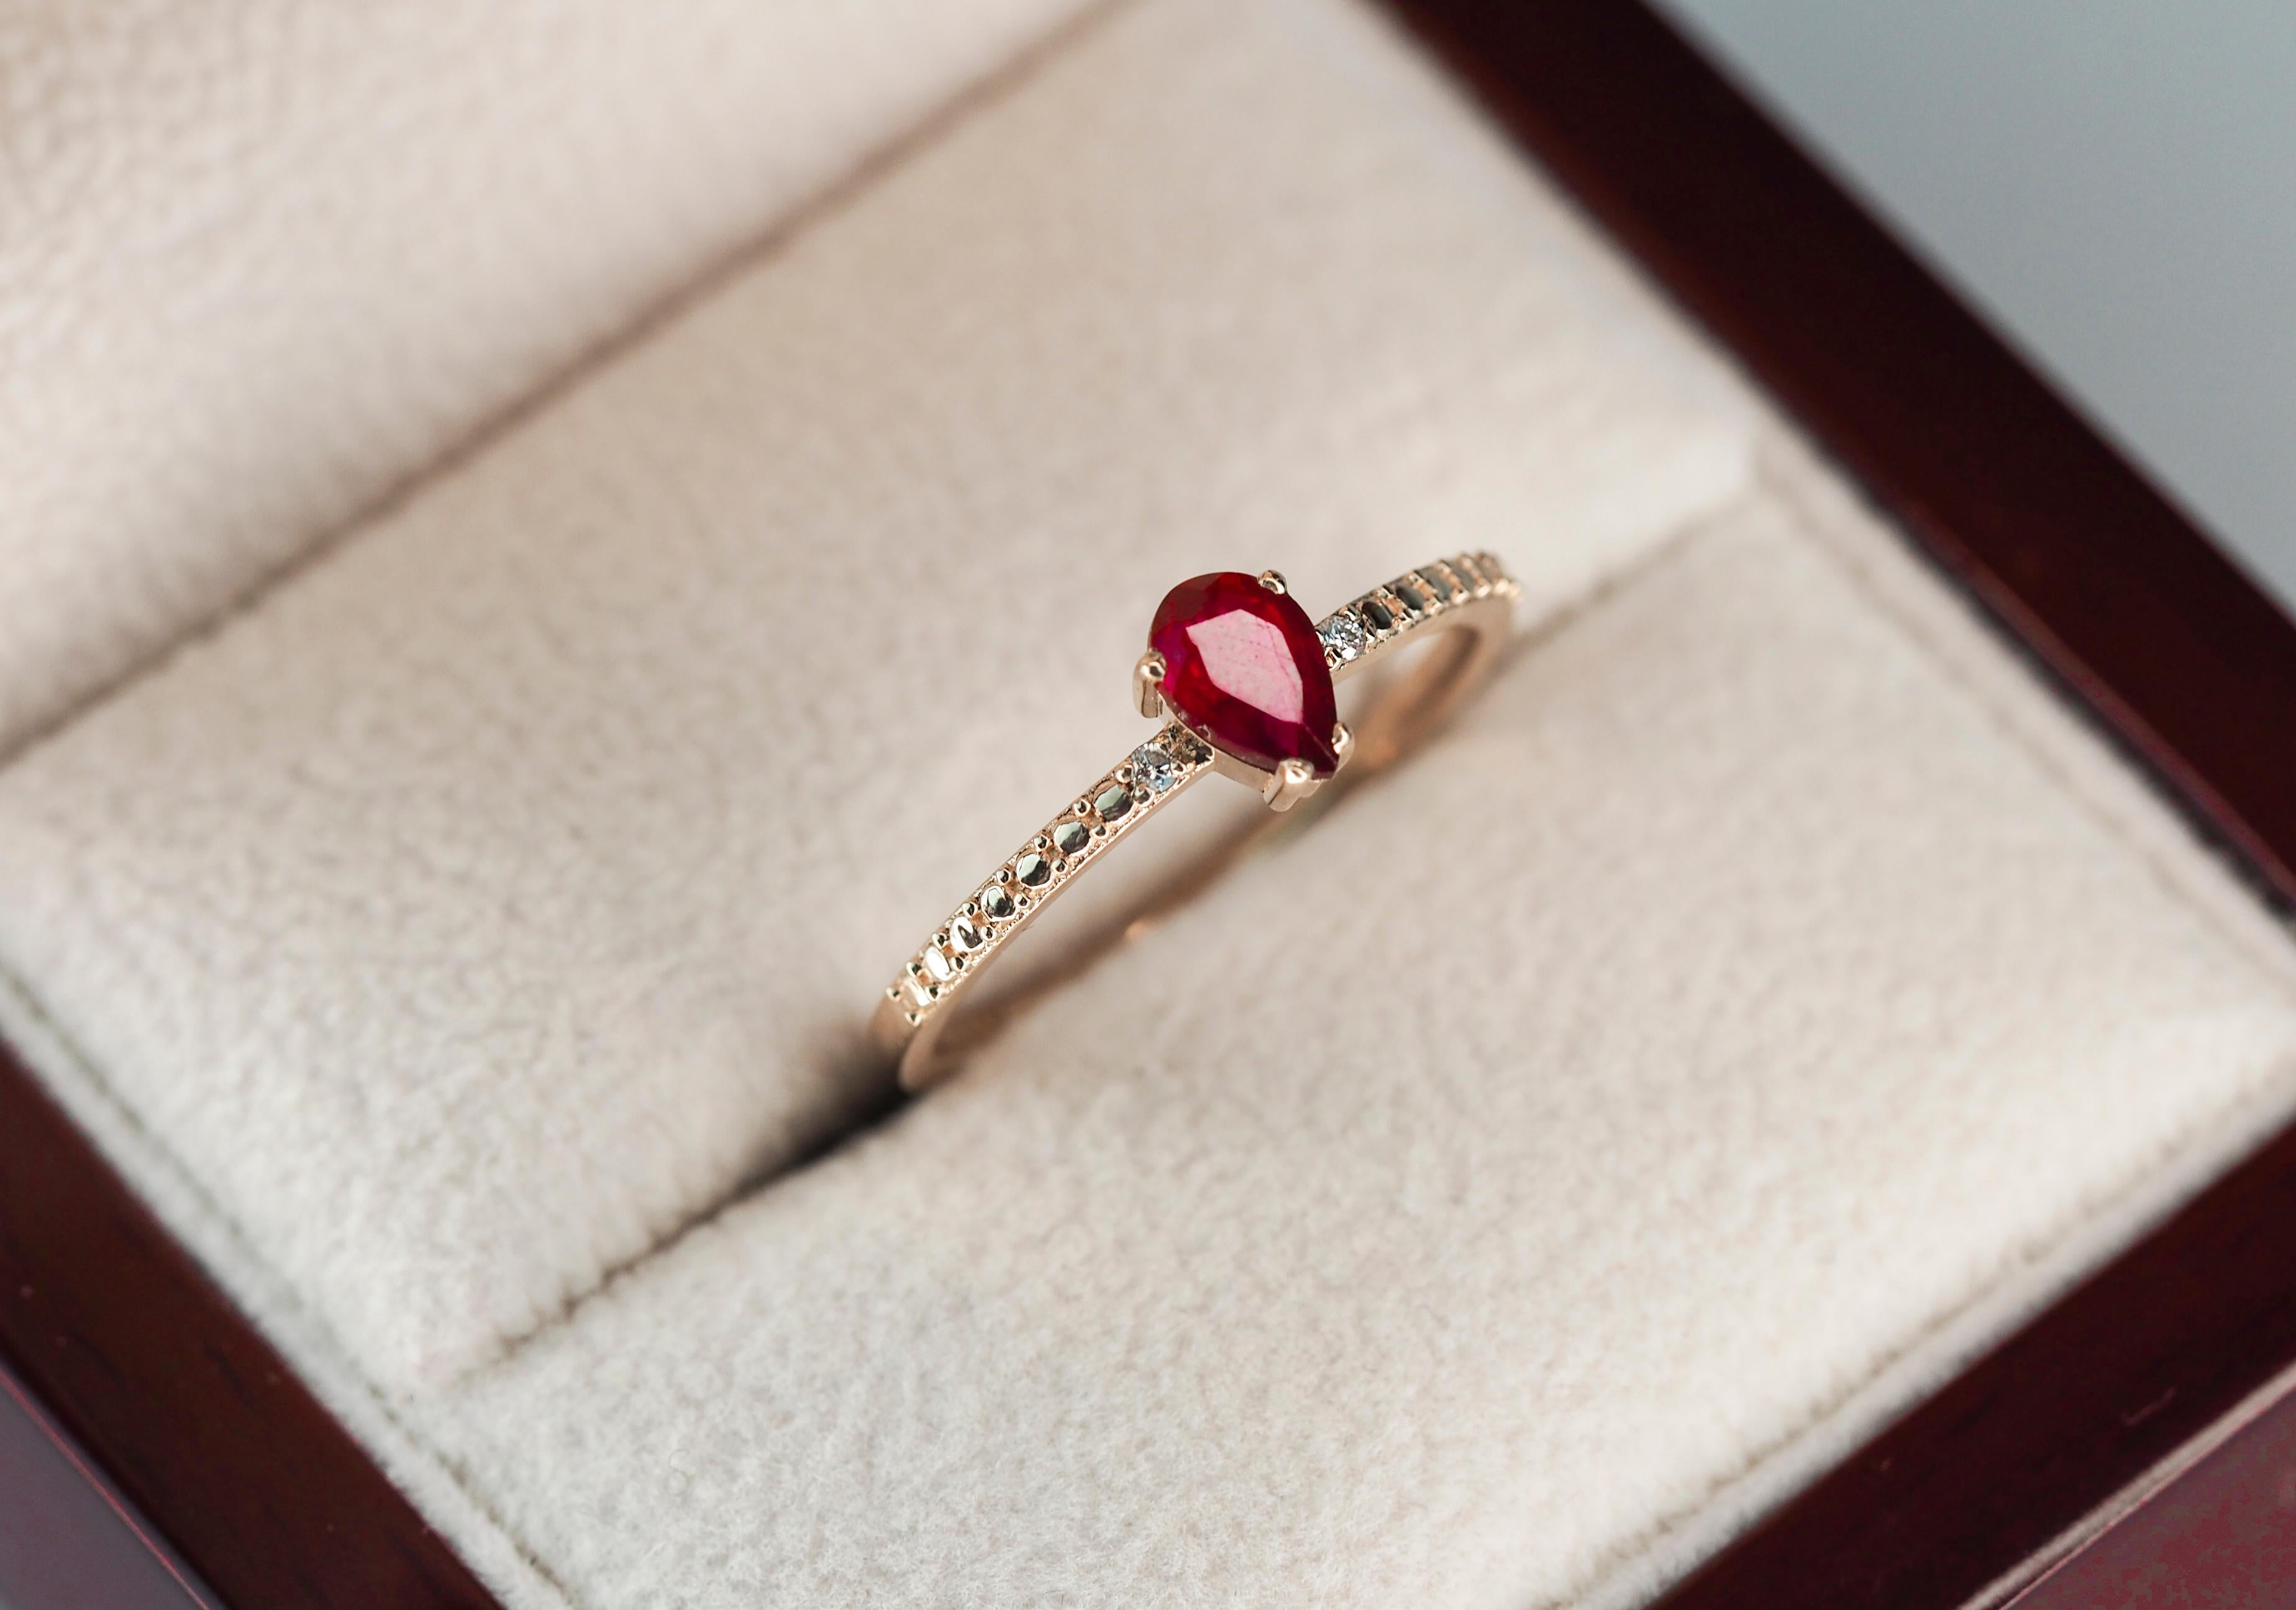 For Sale:  14 karat Gold Ring with Pear Ruby and Diamonds. Minimalist ruby ring 4